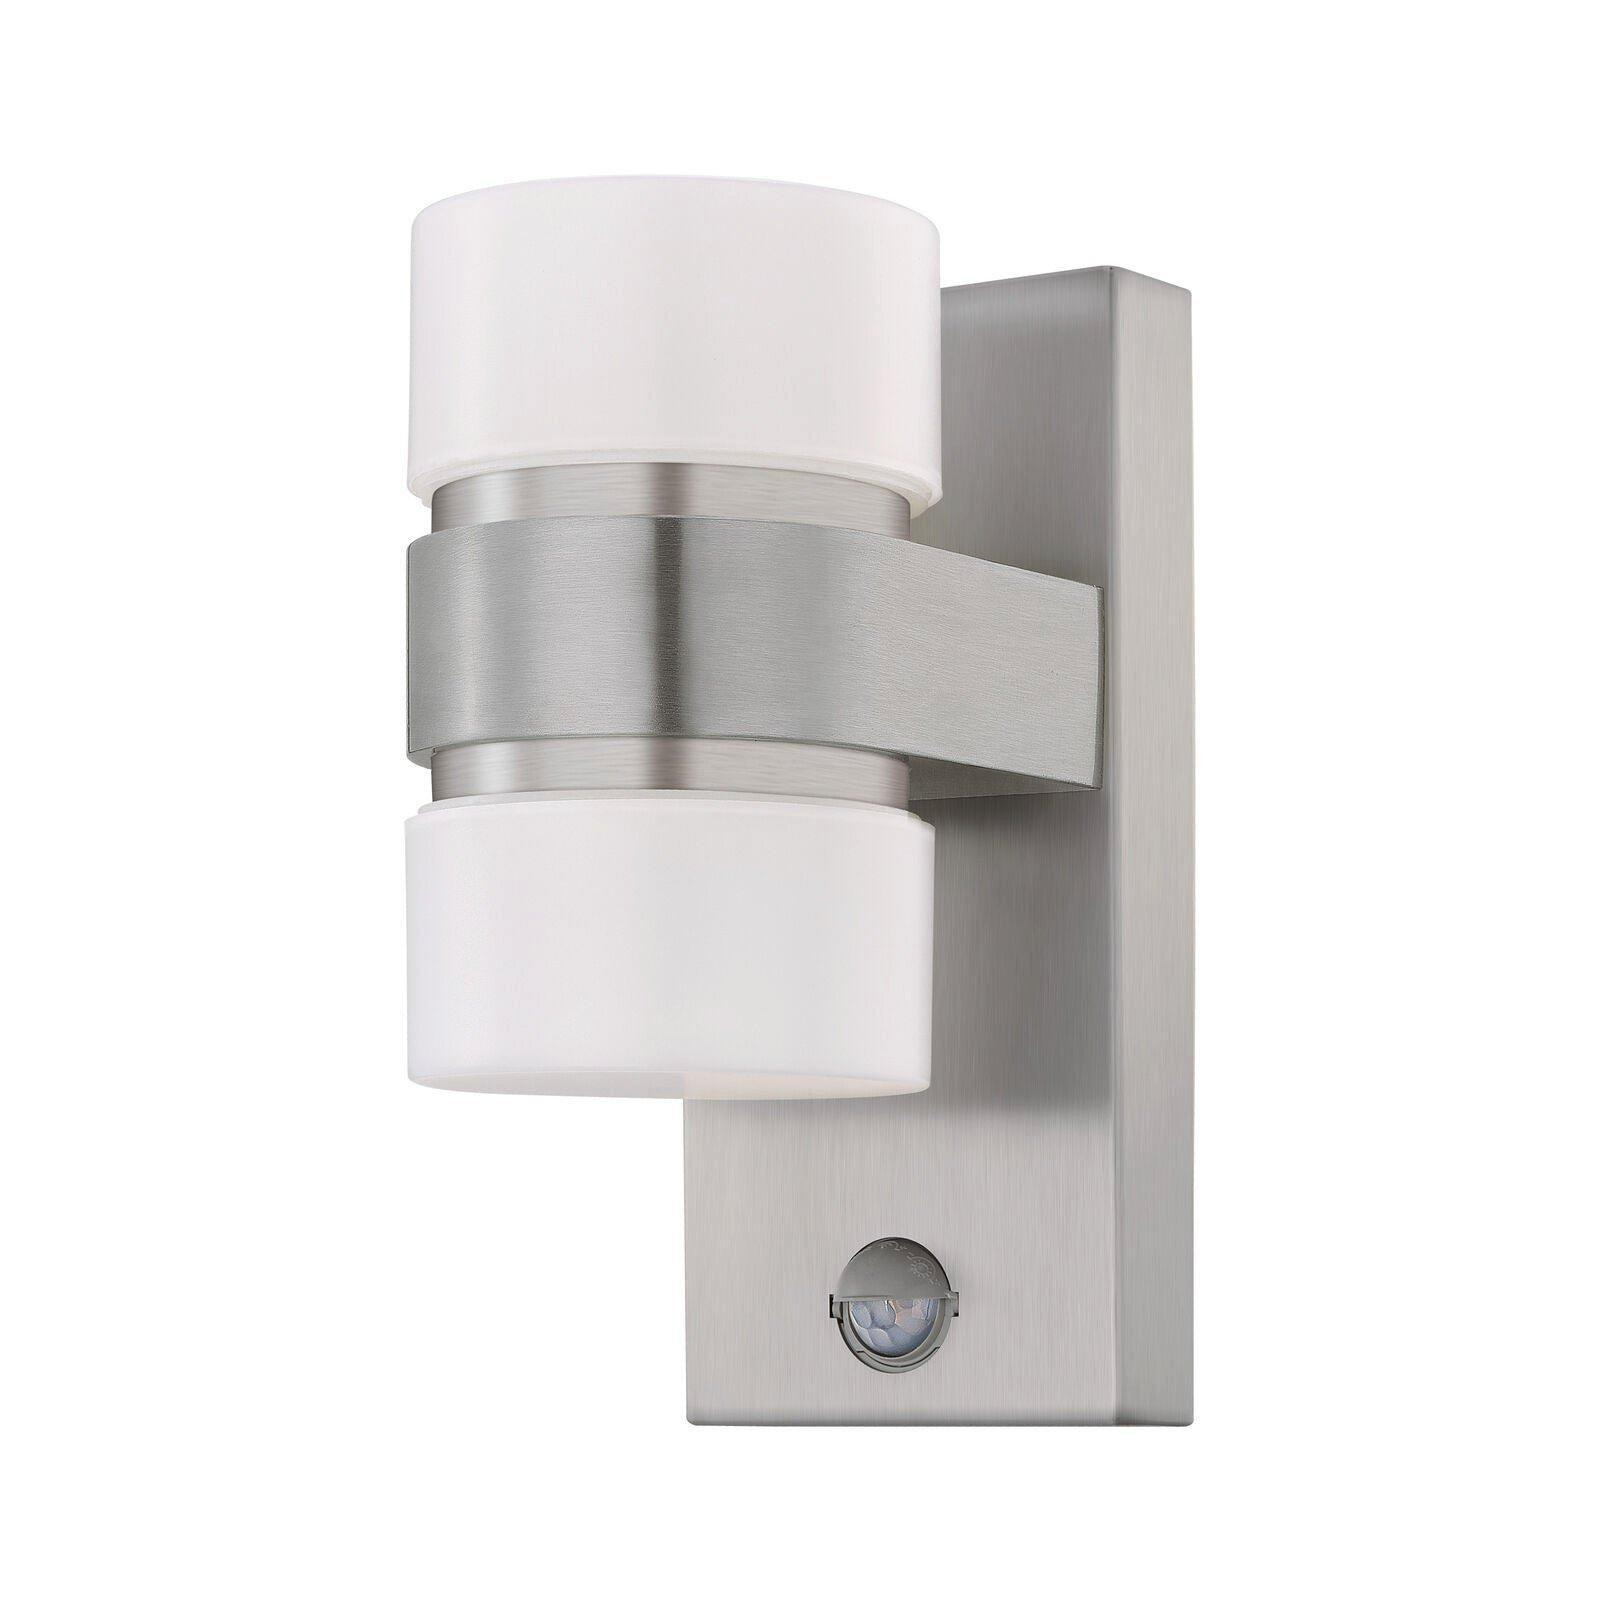 IP44 Outdoor Wall Light & PIR Sensor Stainless Steel & Silver 6W Built in LED - image 1